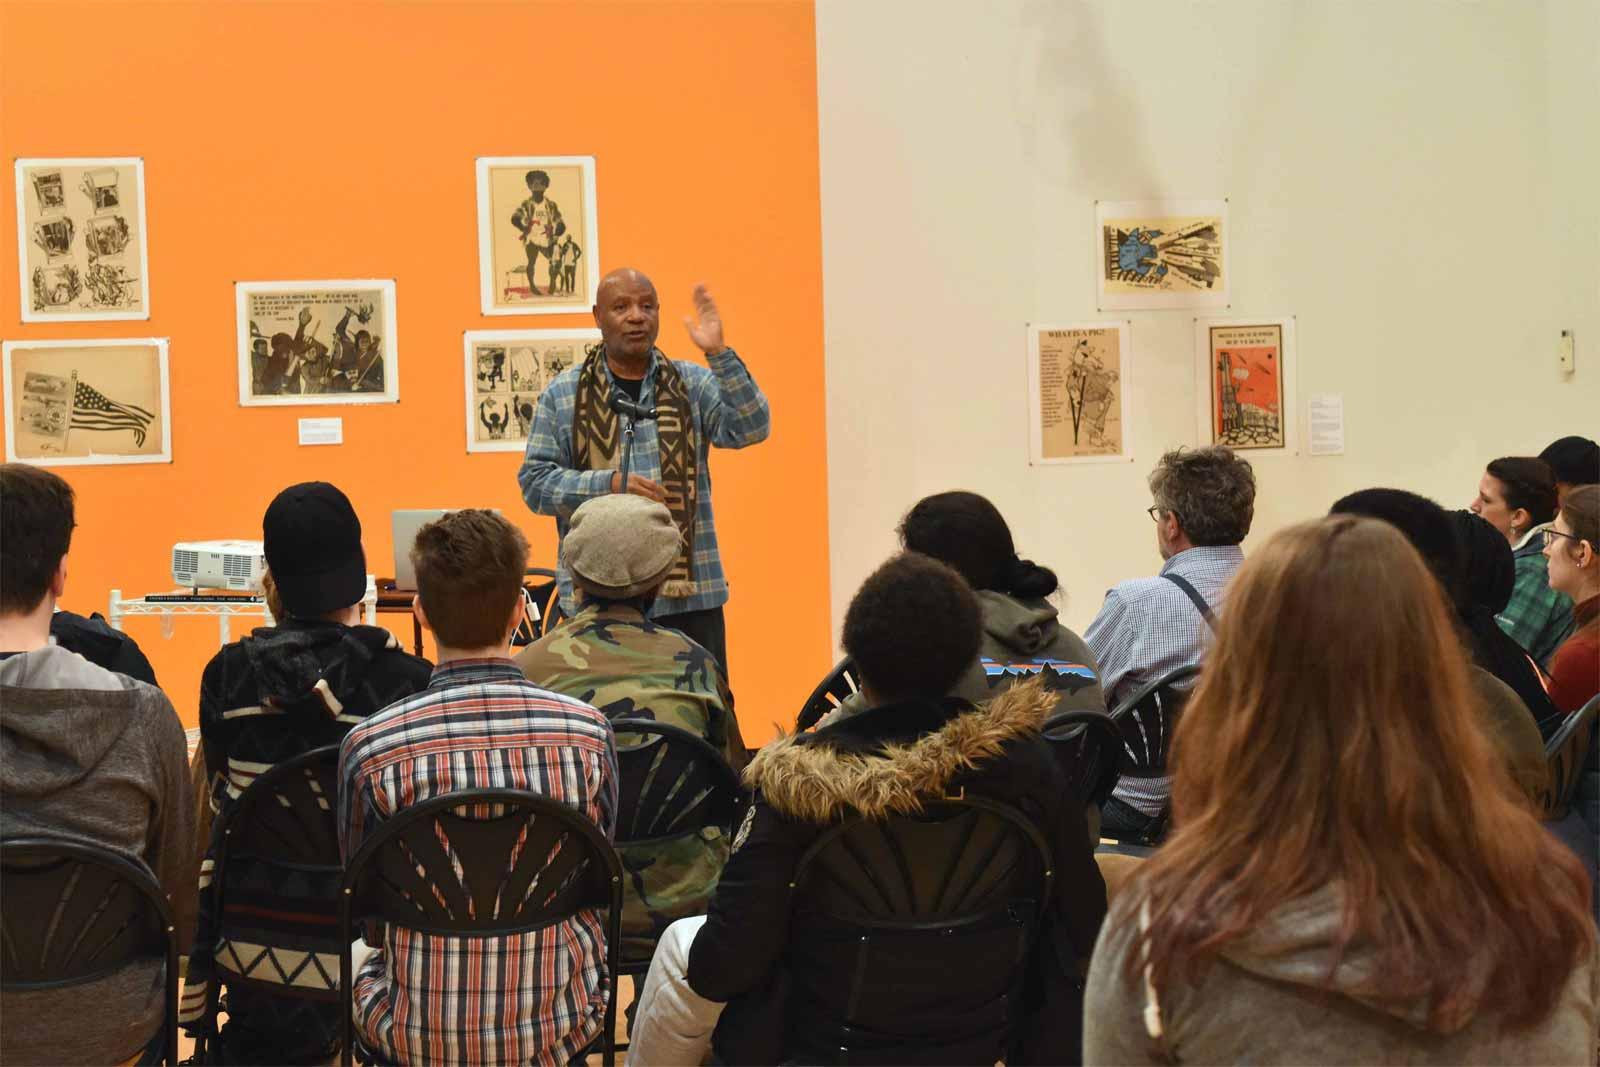 Emory Douglas in conversation with students at the Denison Museum, 2018.